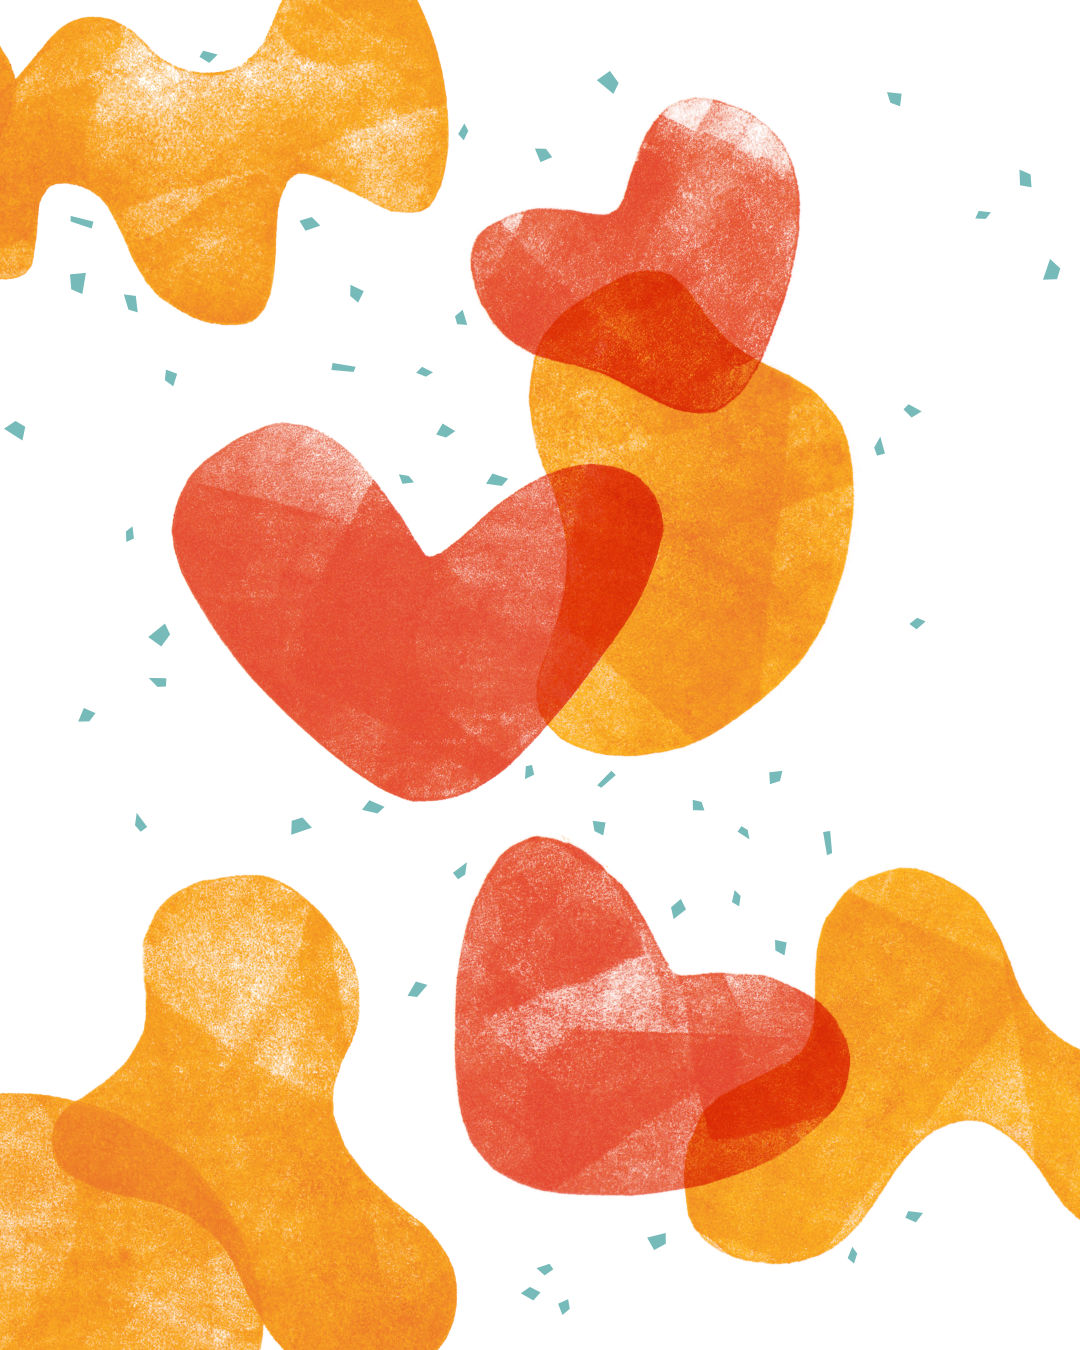 A digital illustration of orange blobs and red shapes that resemble hearts, all intermixed with light blue confetti shapes. The orange and red shapes are patchily colored.